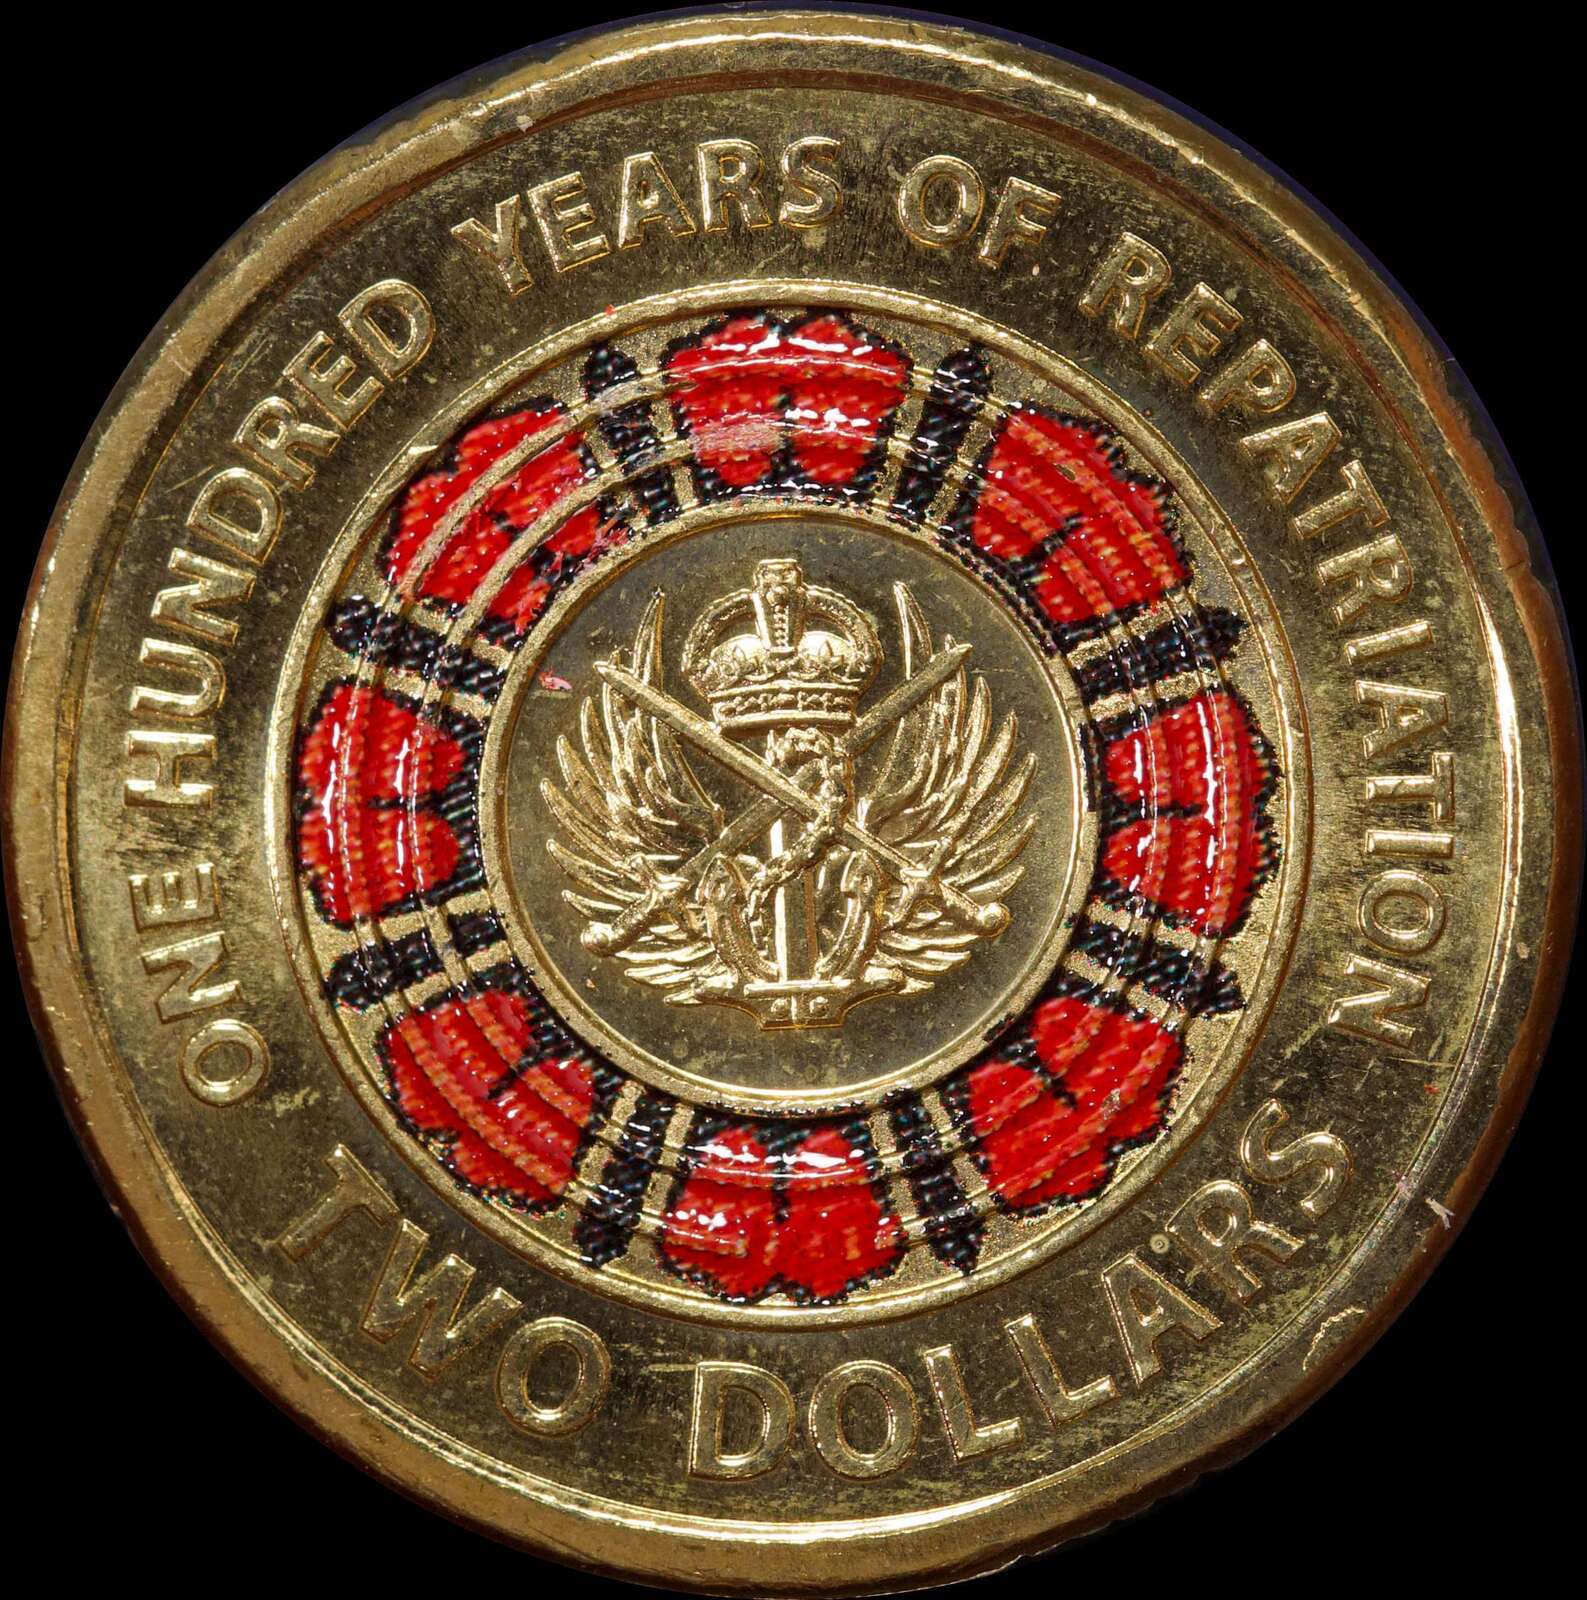 2019 Coloured 2 Dollar Coin Repatriation Centenary Uncirculated product image